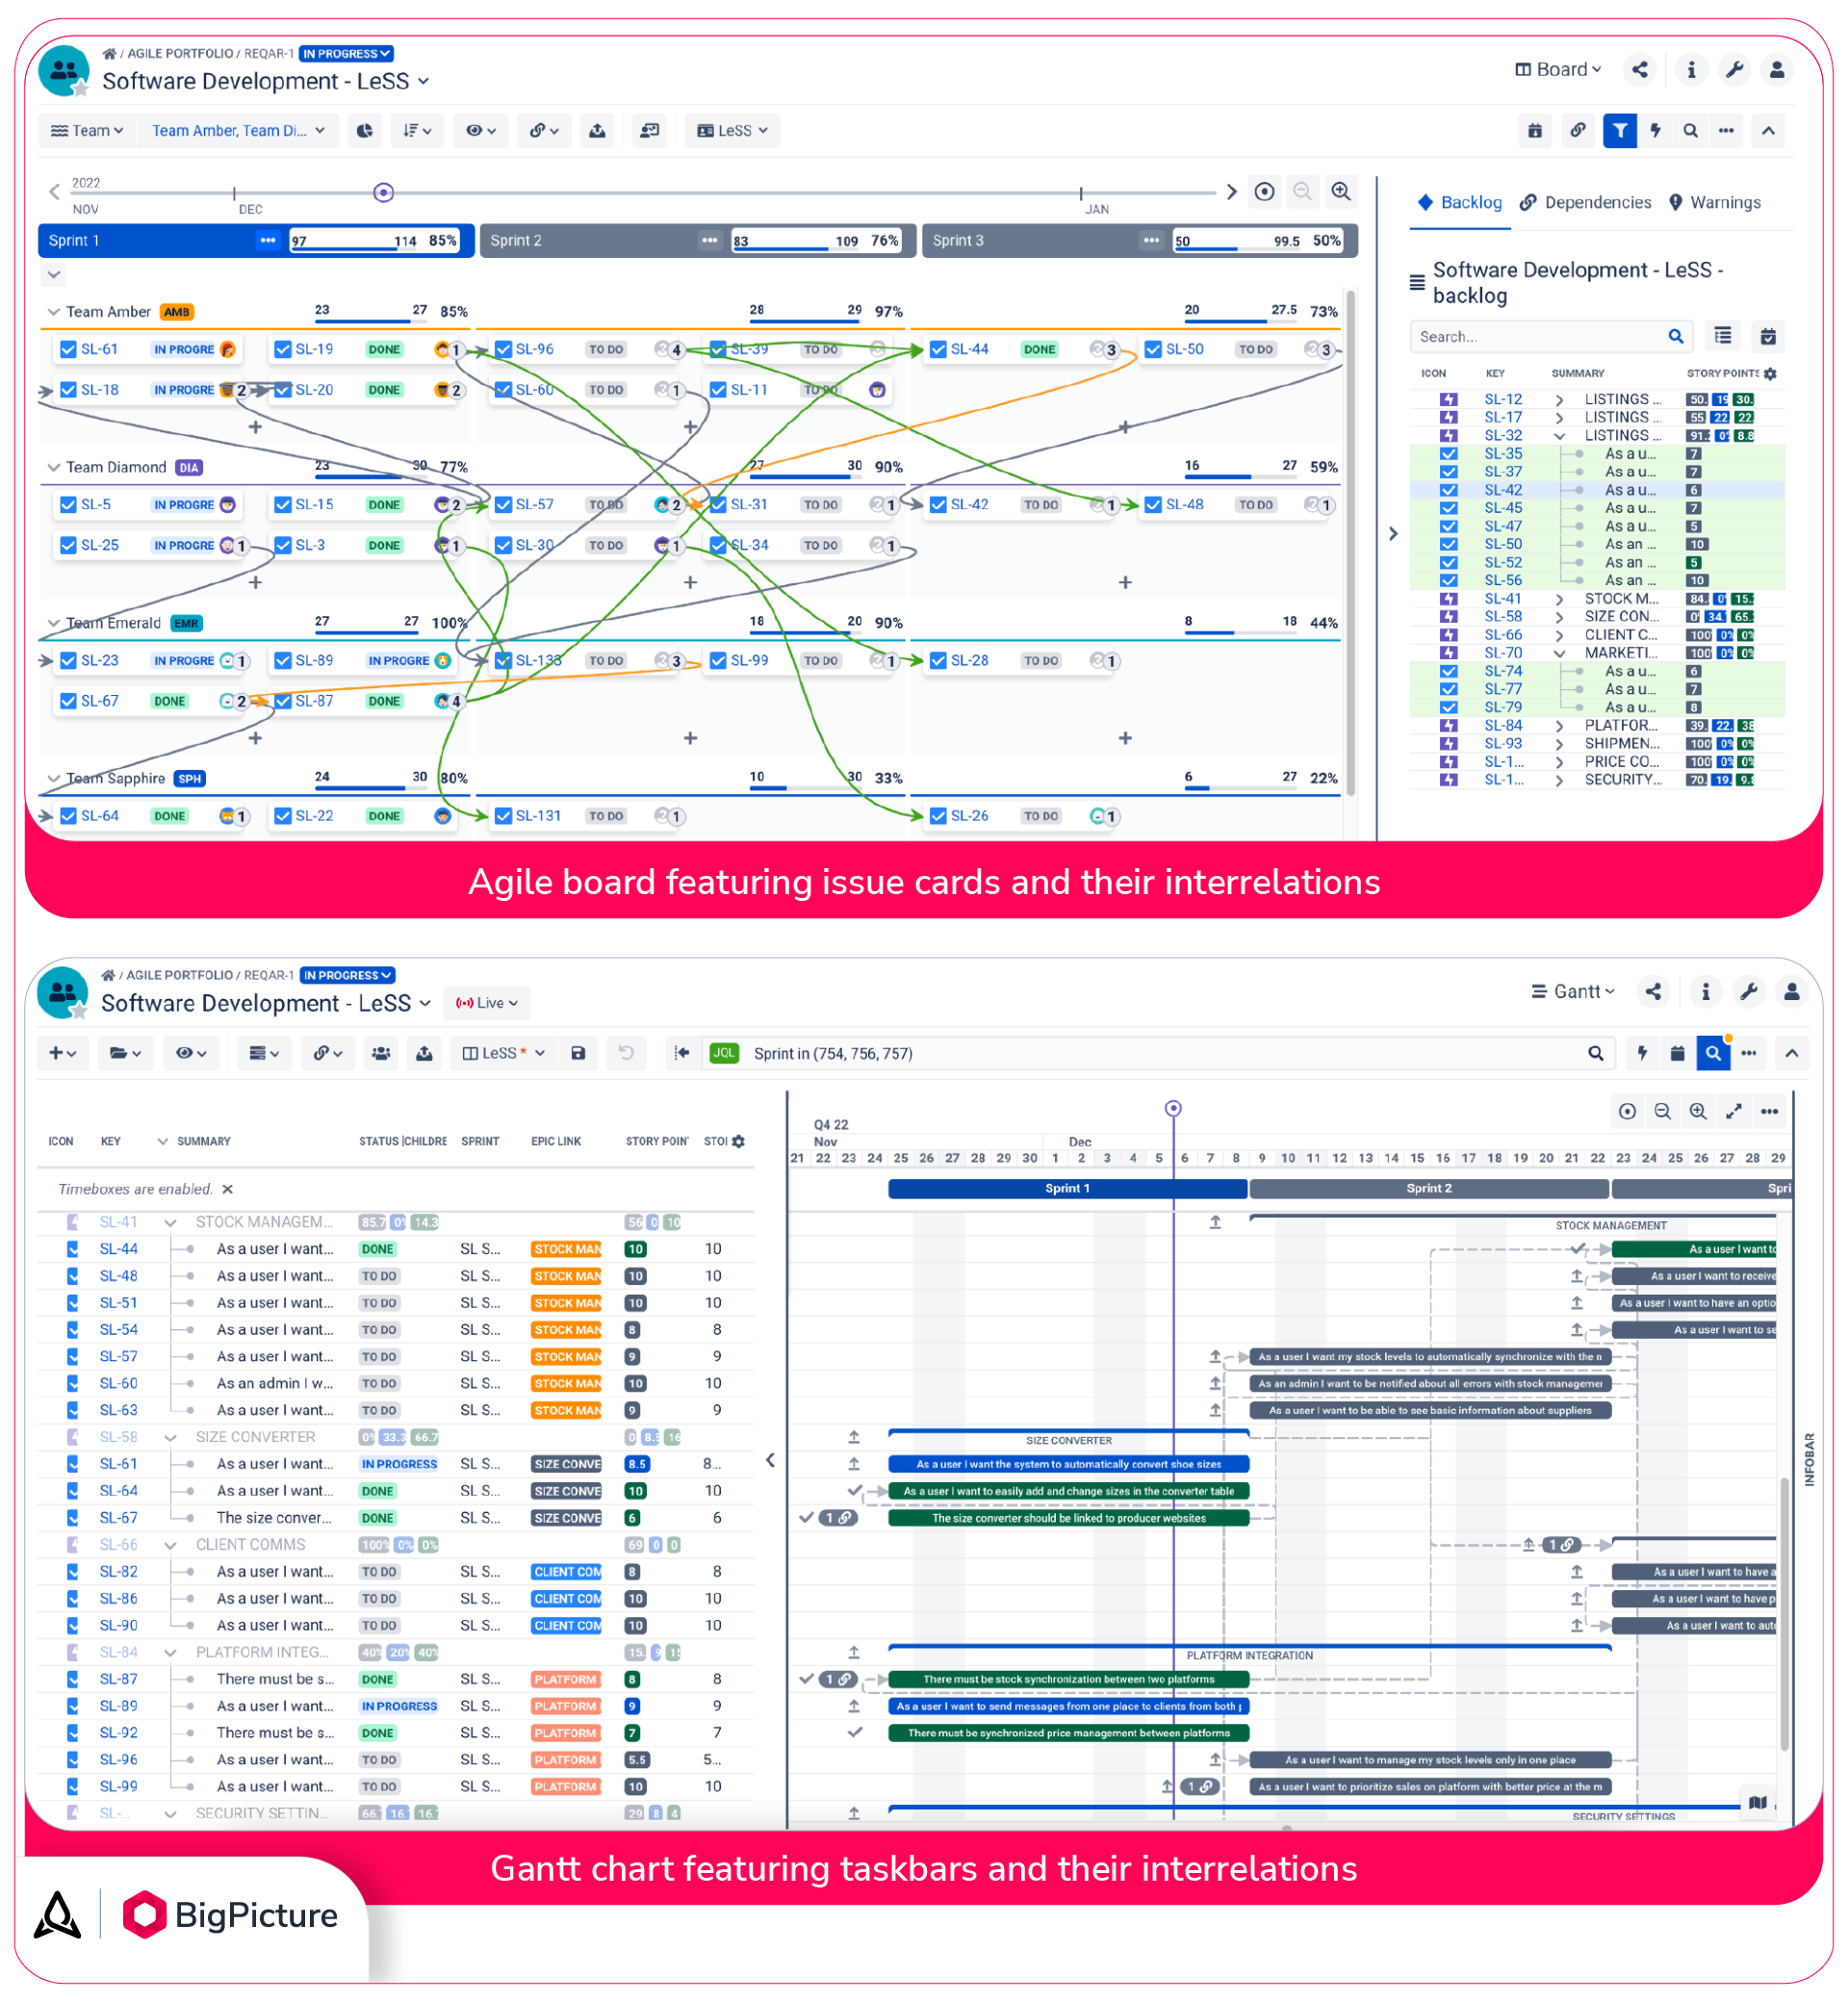 Project dependencies visualized on Agile board (top) and Gantt chart (bottom).